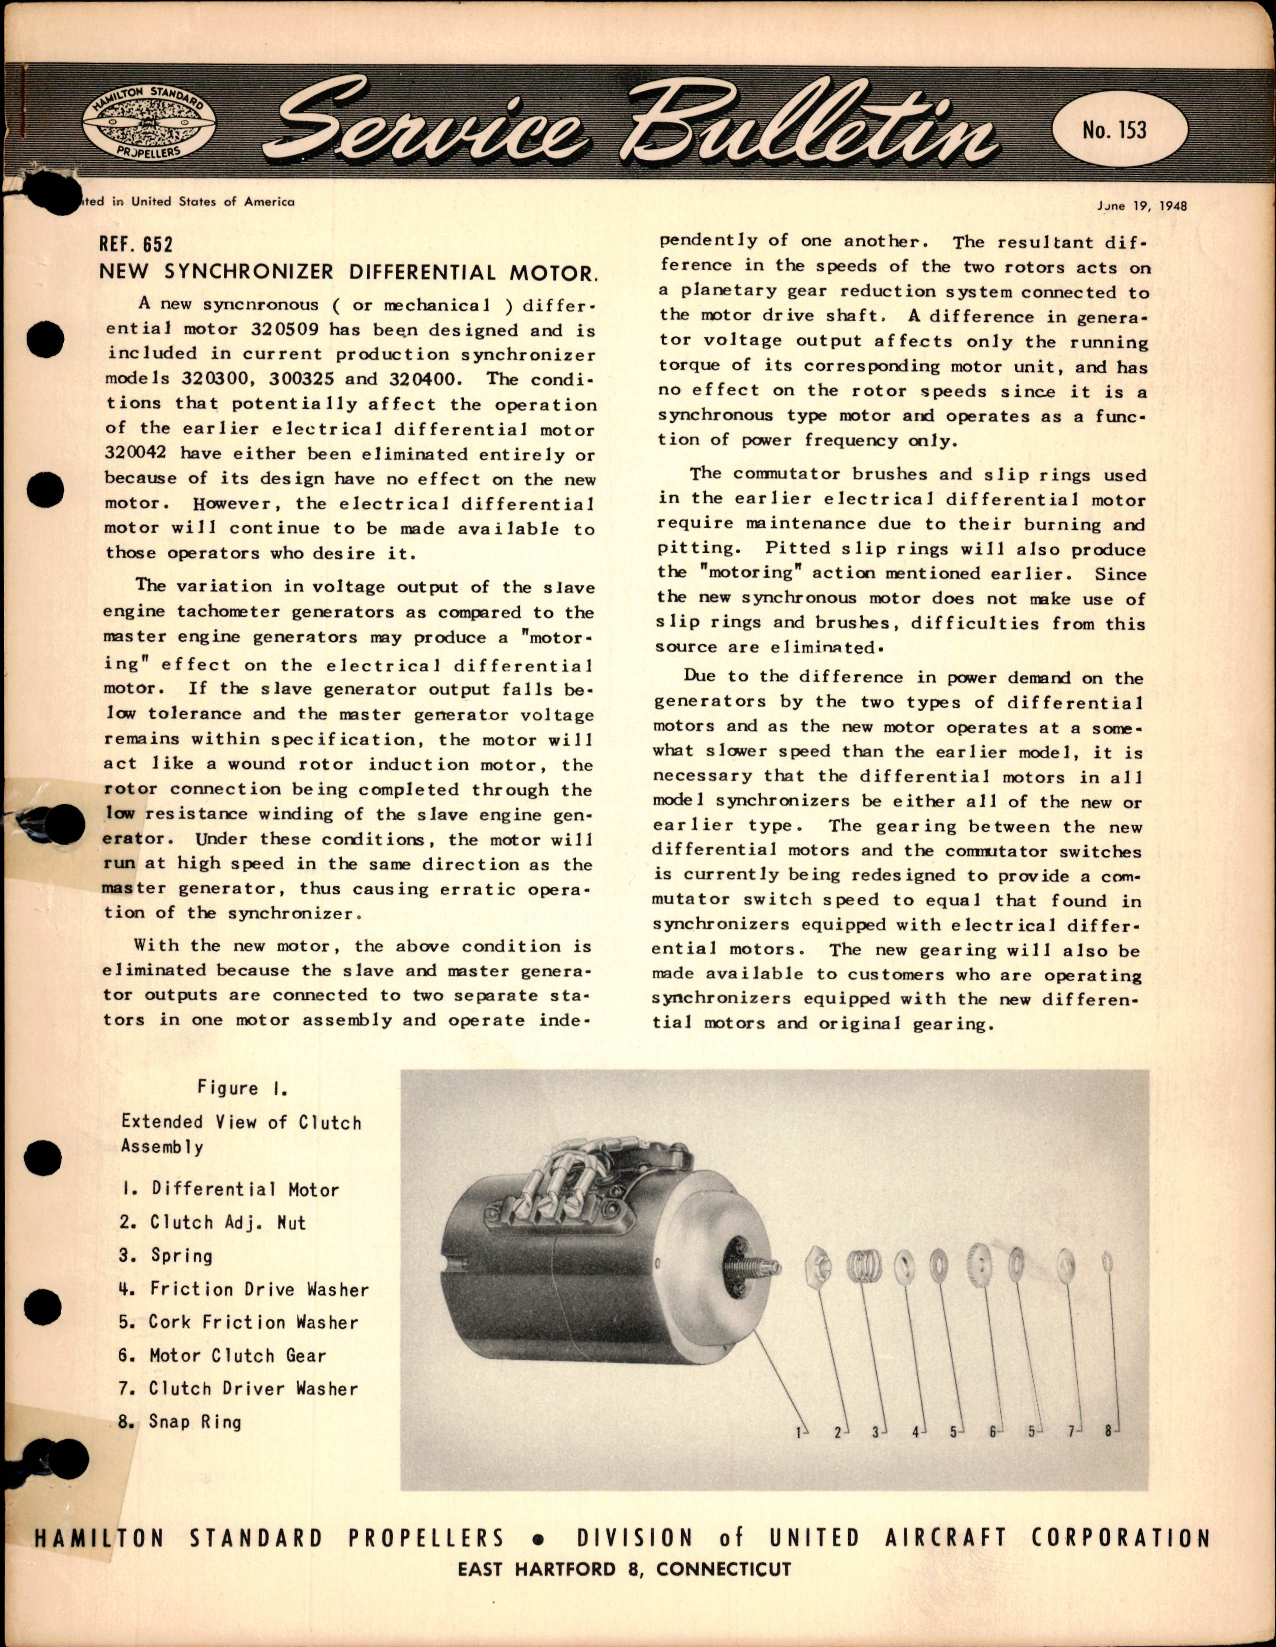 Sample page 1 from AirCorps Library document: New Synchronizer Differential Motor, Ref 652